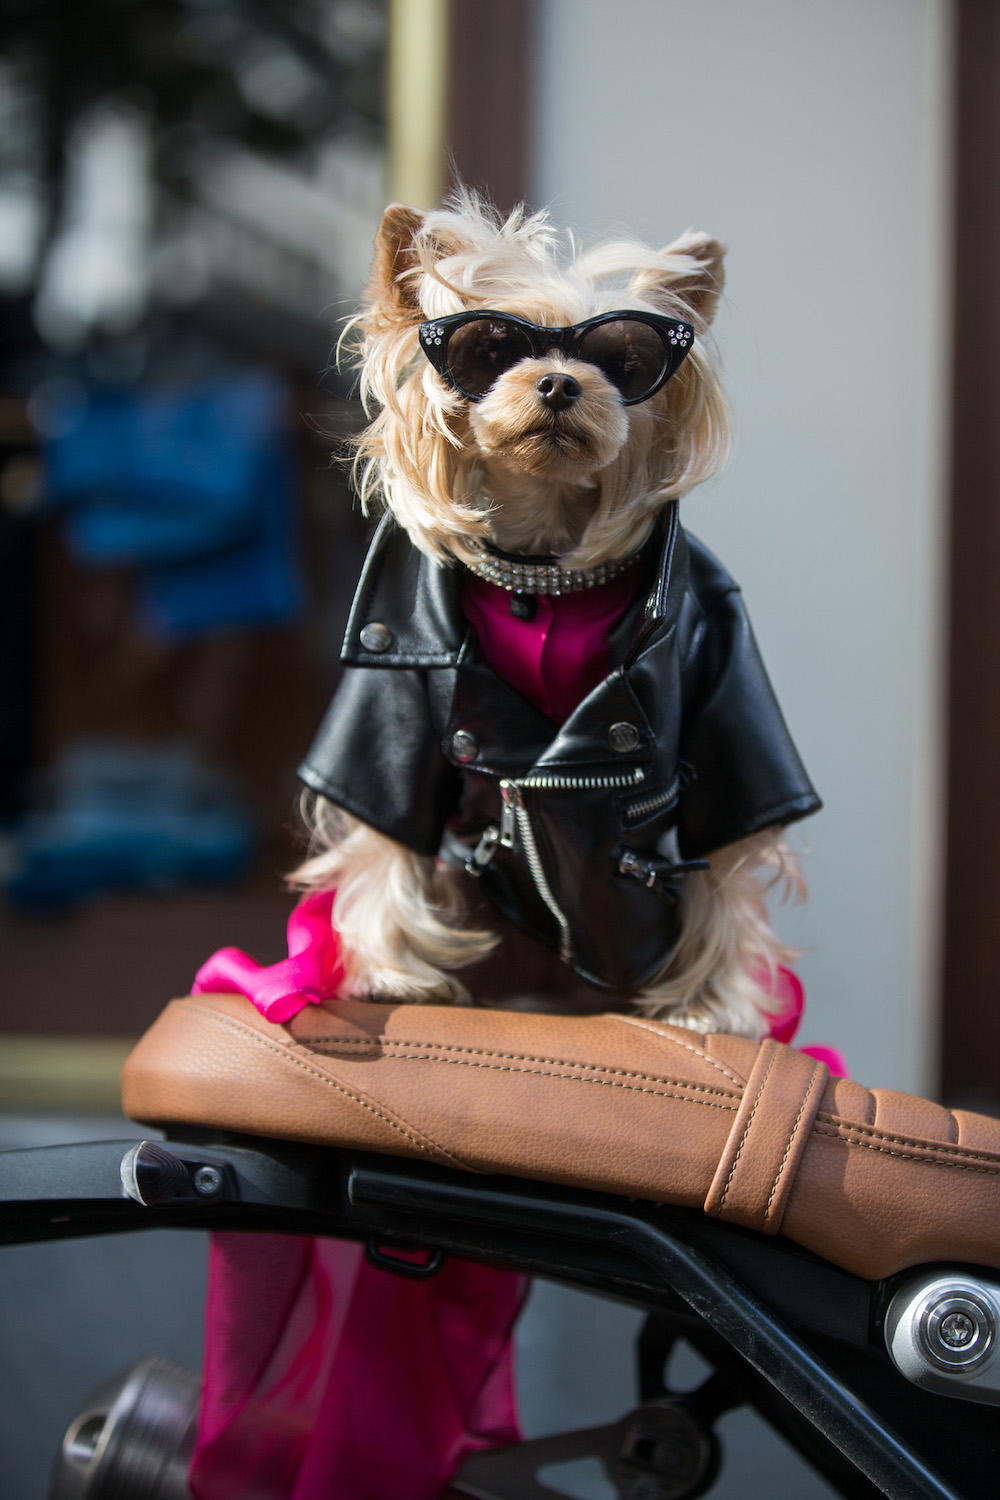 PARIS, FRANCE - OCTOBER 02:  Little Lola Sunshine the dog wears a leather jacket, black sunglasses, and a pink dress outside the Valentino show on October 2, 2016 in Paris, France.  (Photo by Melodie Jeng/Getty Images)